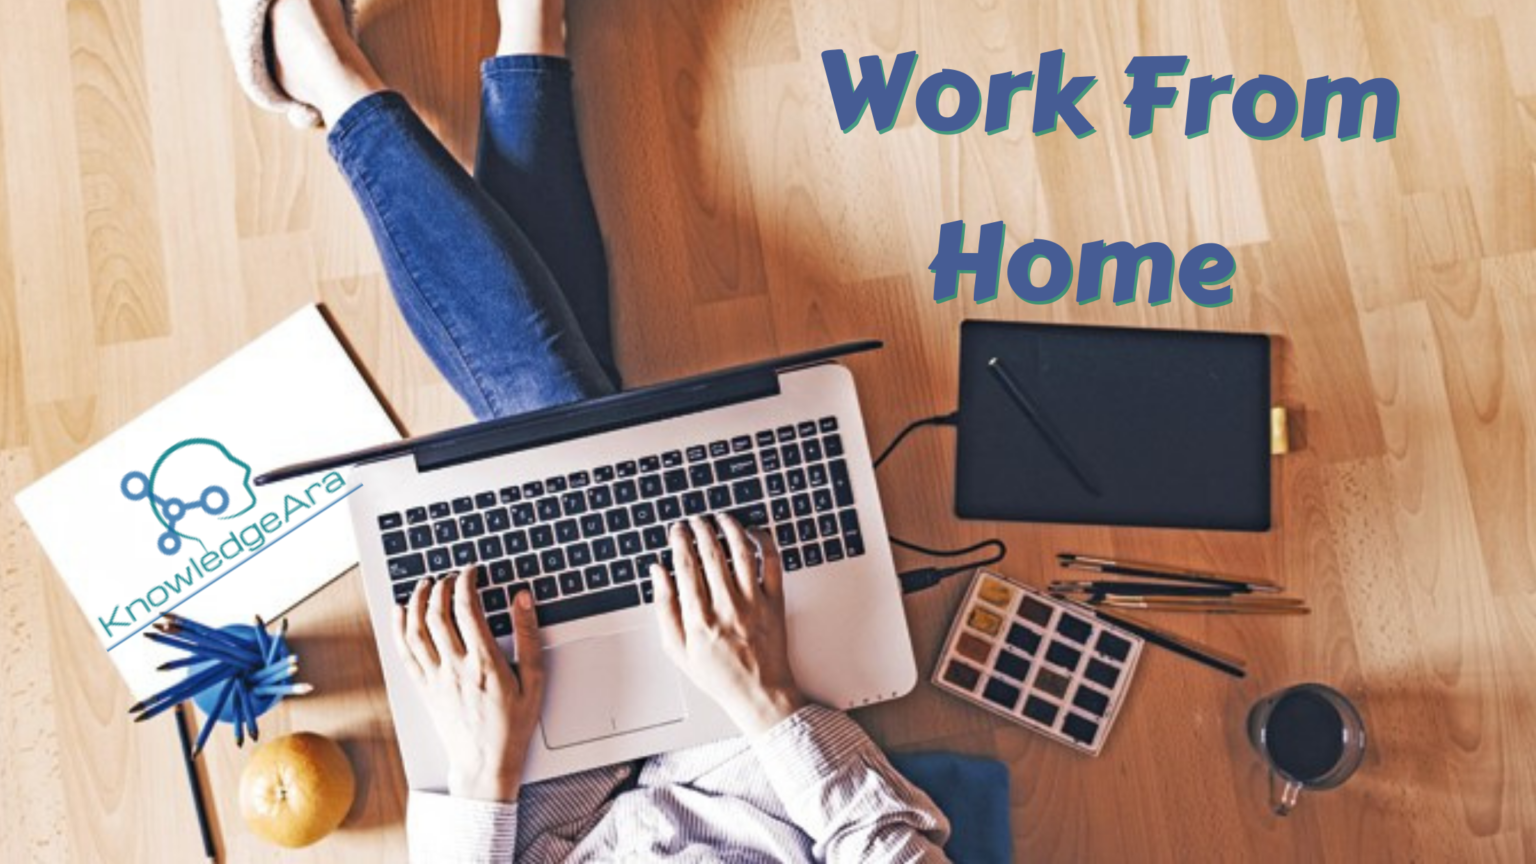 Work form home. Working from Home картинки. Work from Home jobs. A Home from Home.